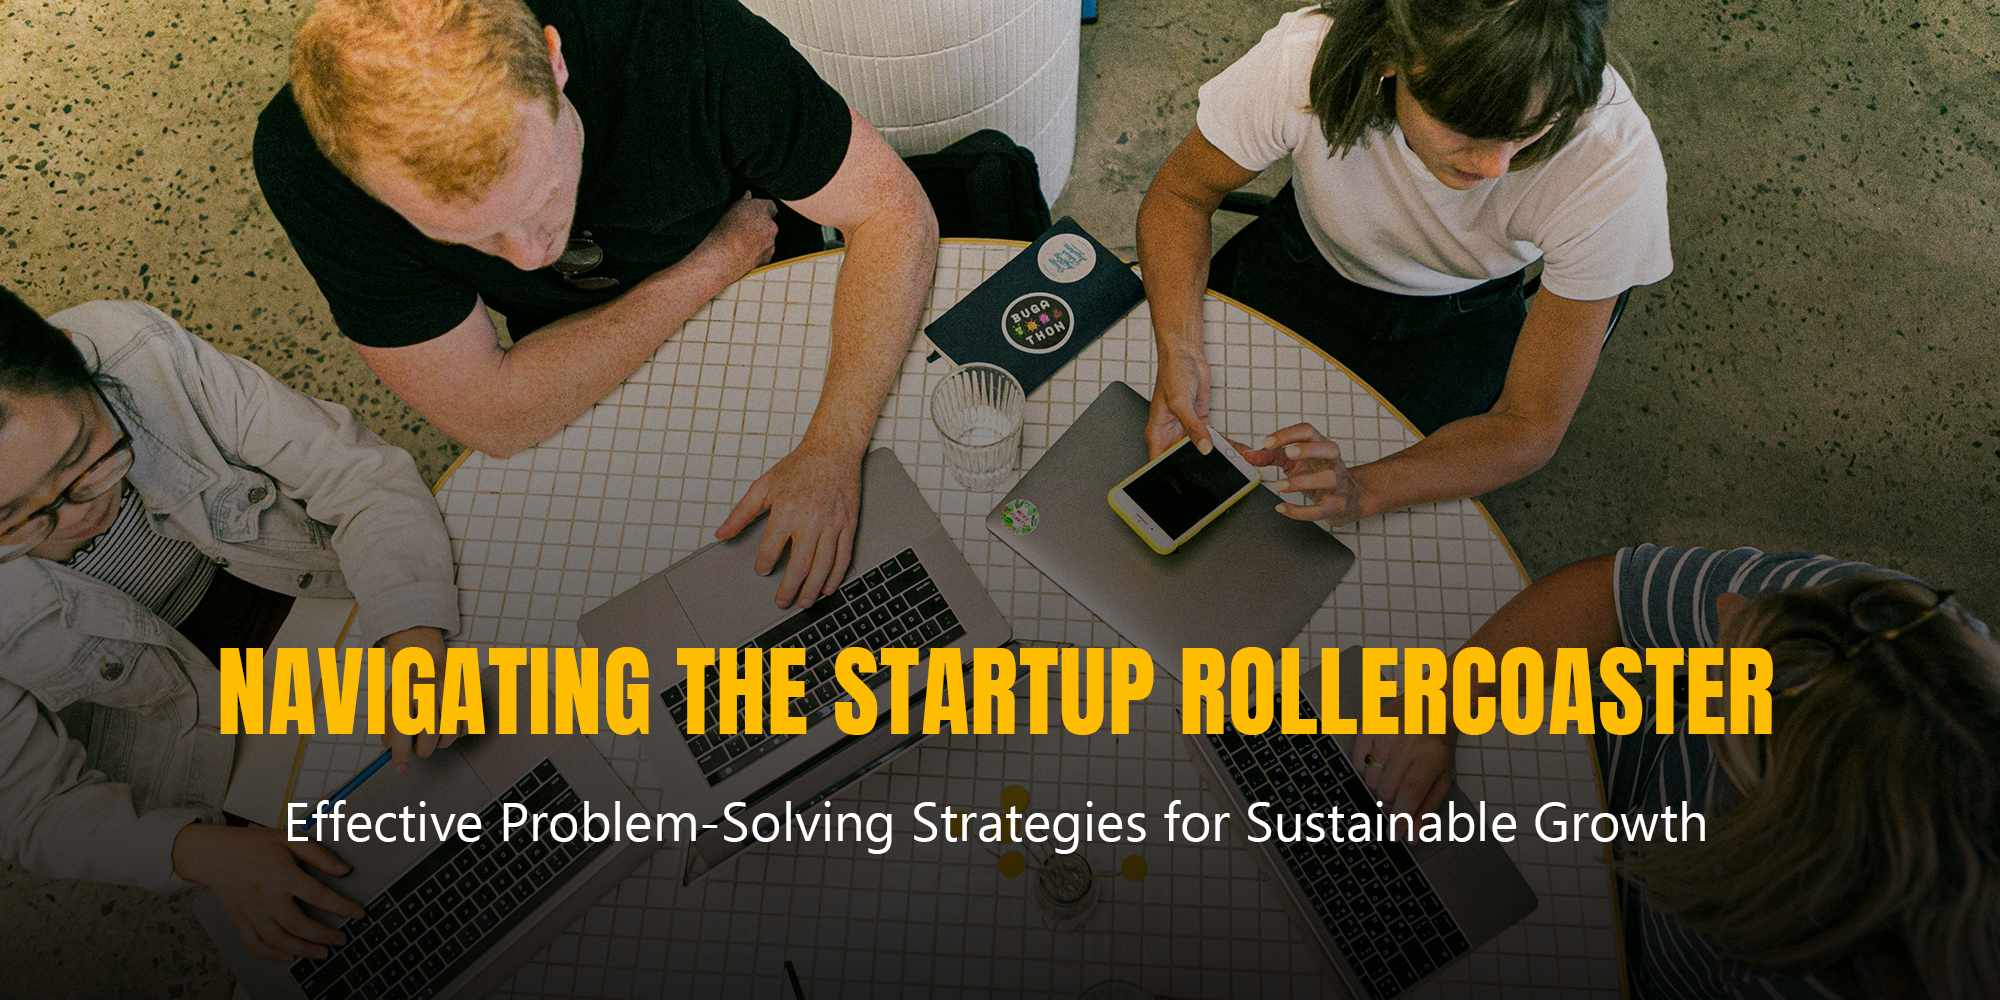 Navigating the Startup Rollercoaster: Effective Problem-Solving Strategies for Sustainable Growth